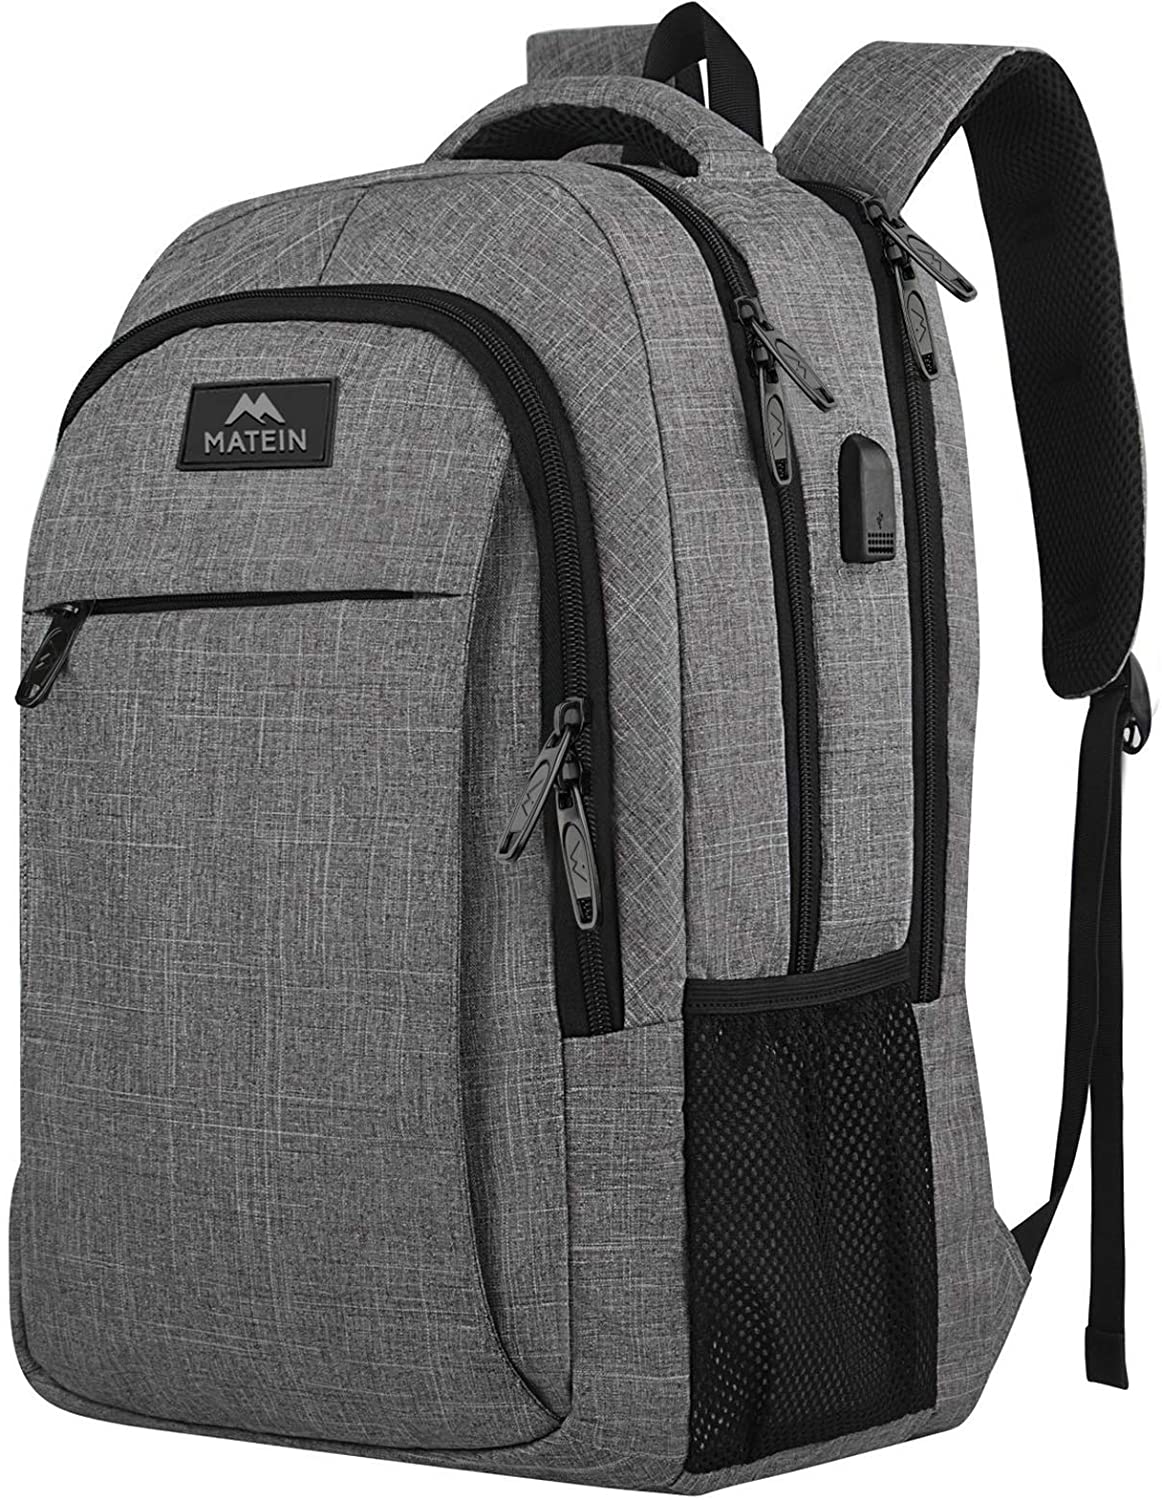 Matein Padded Charging Travel Backpack